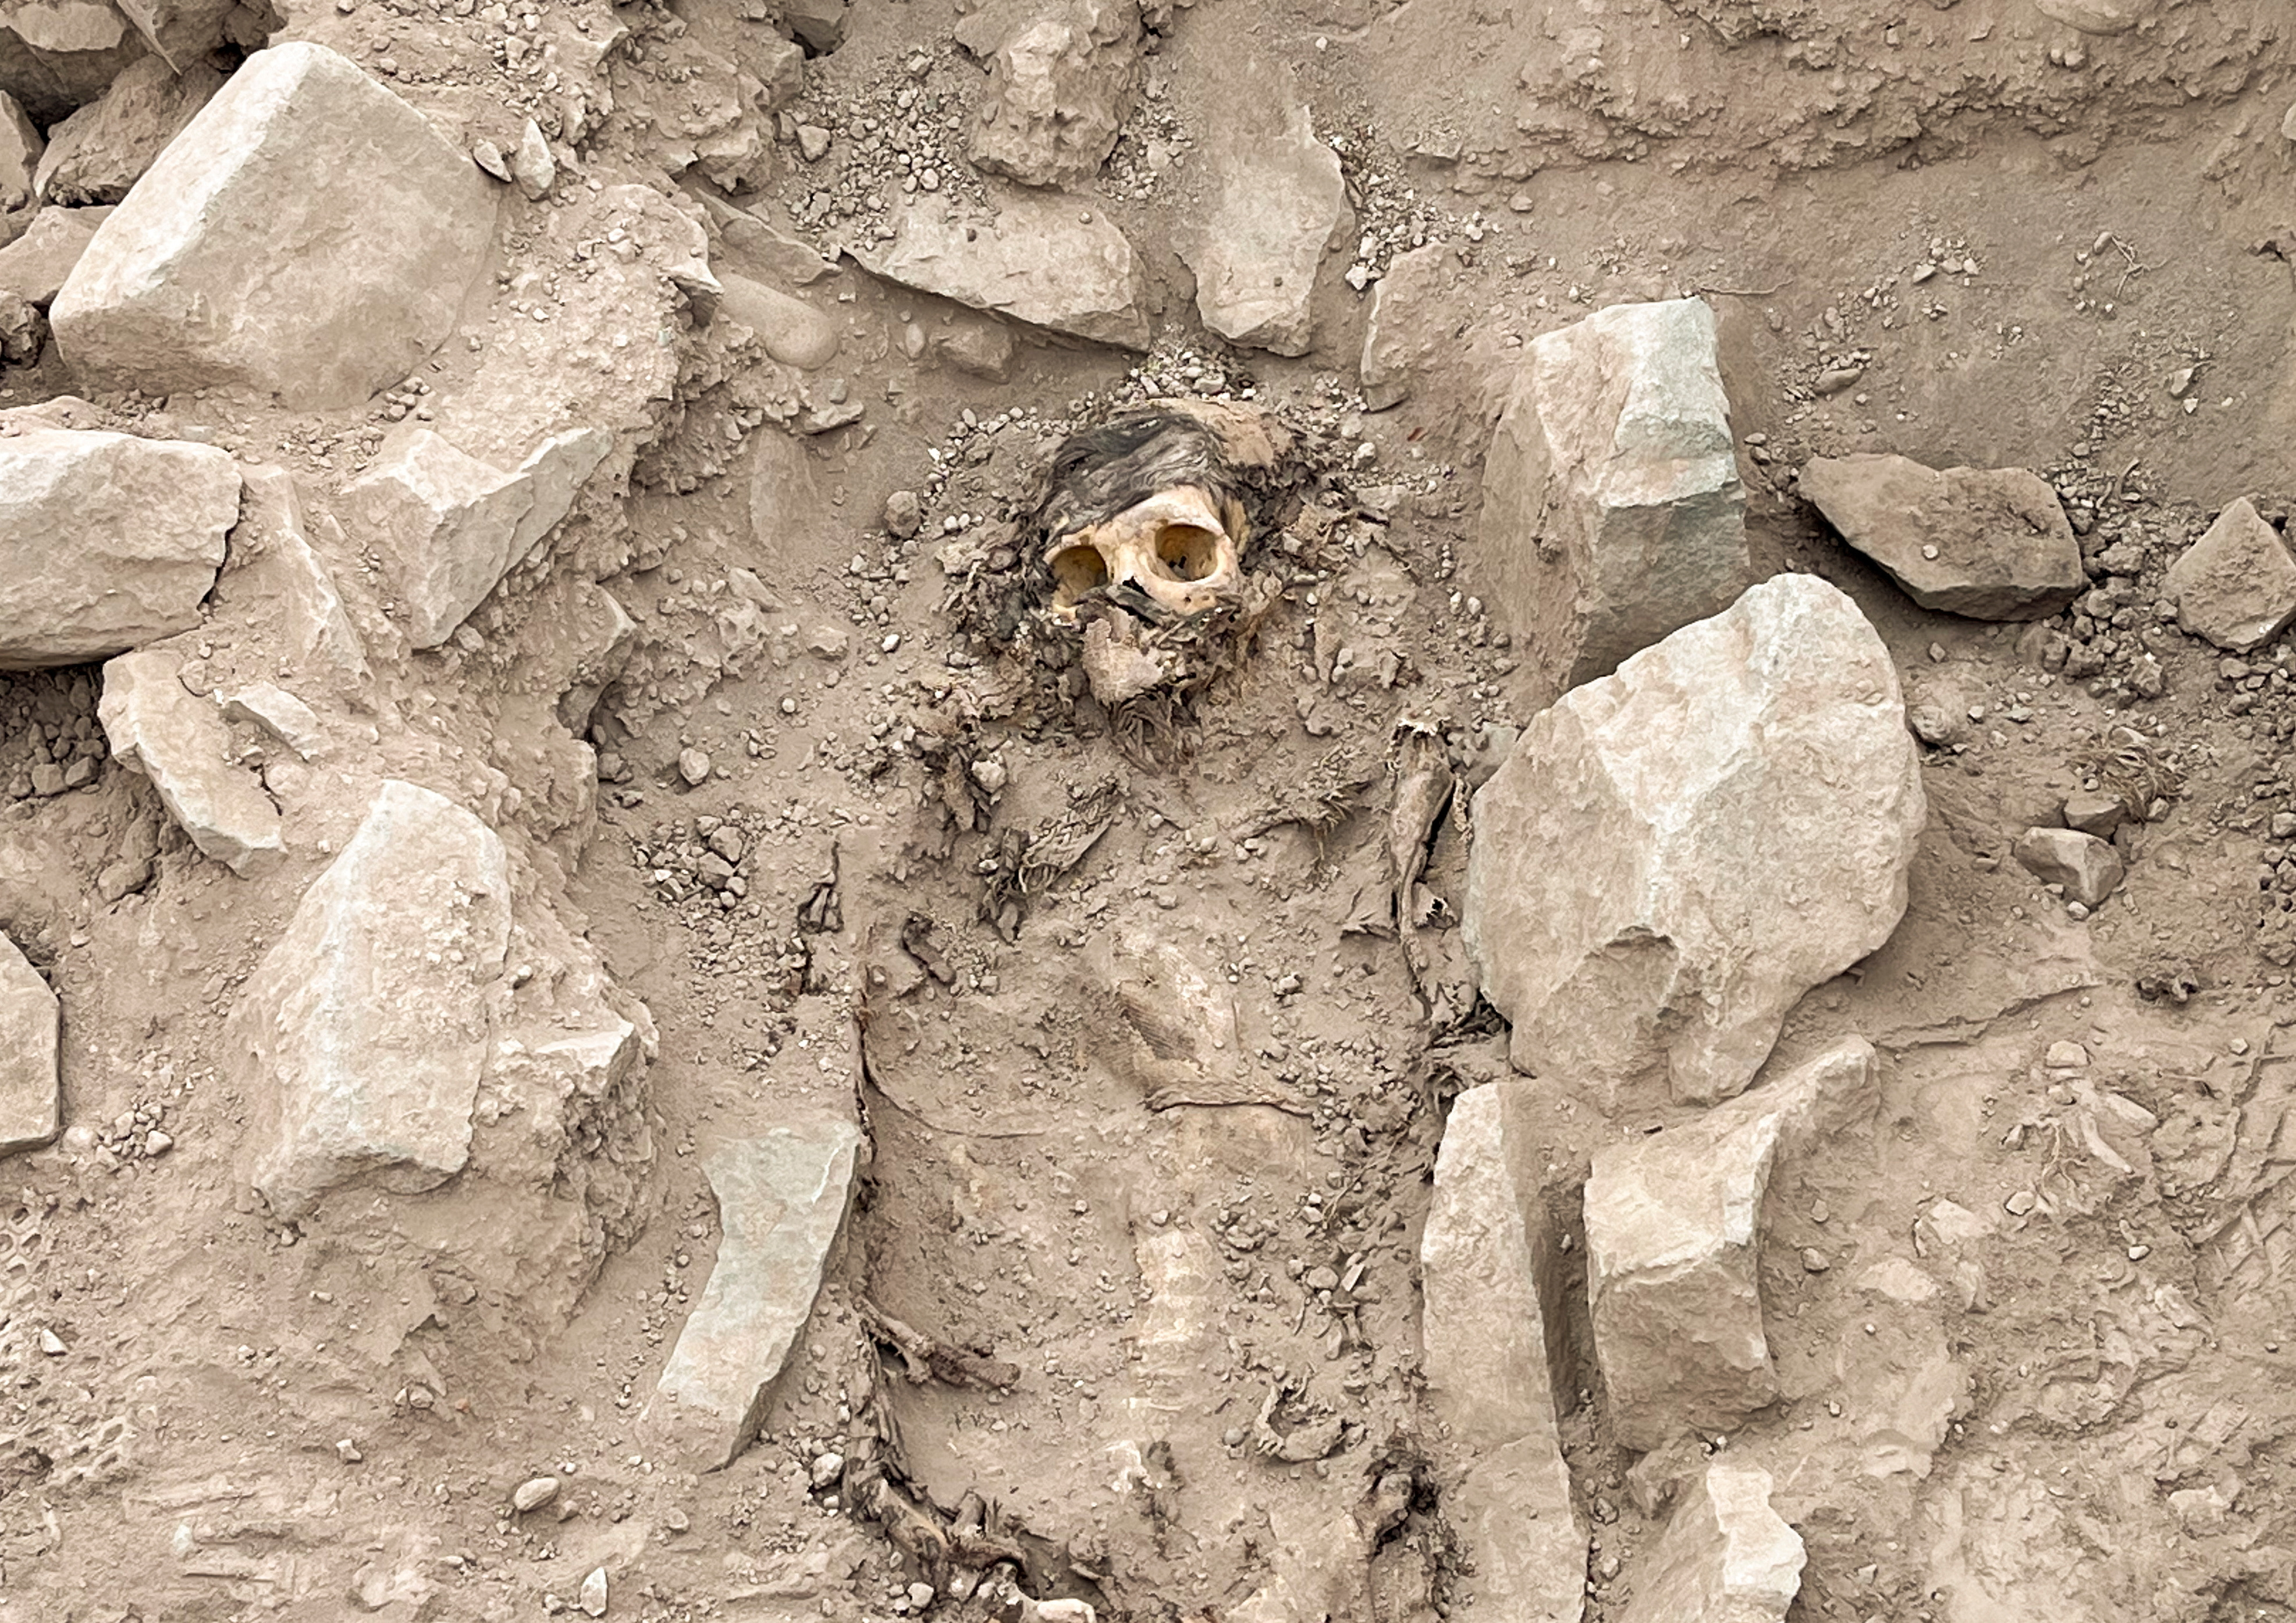 What did Archaeologists Discover in Peru?